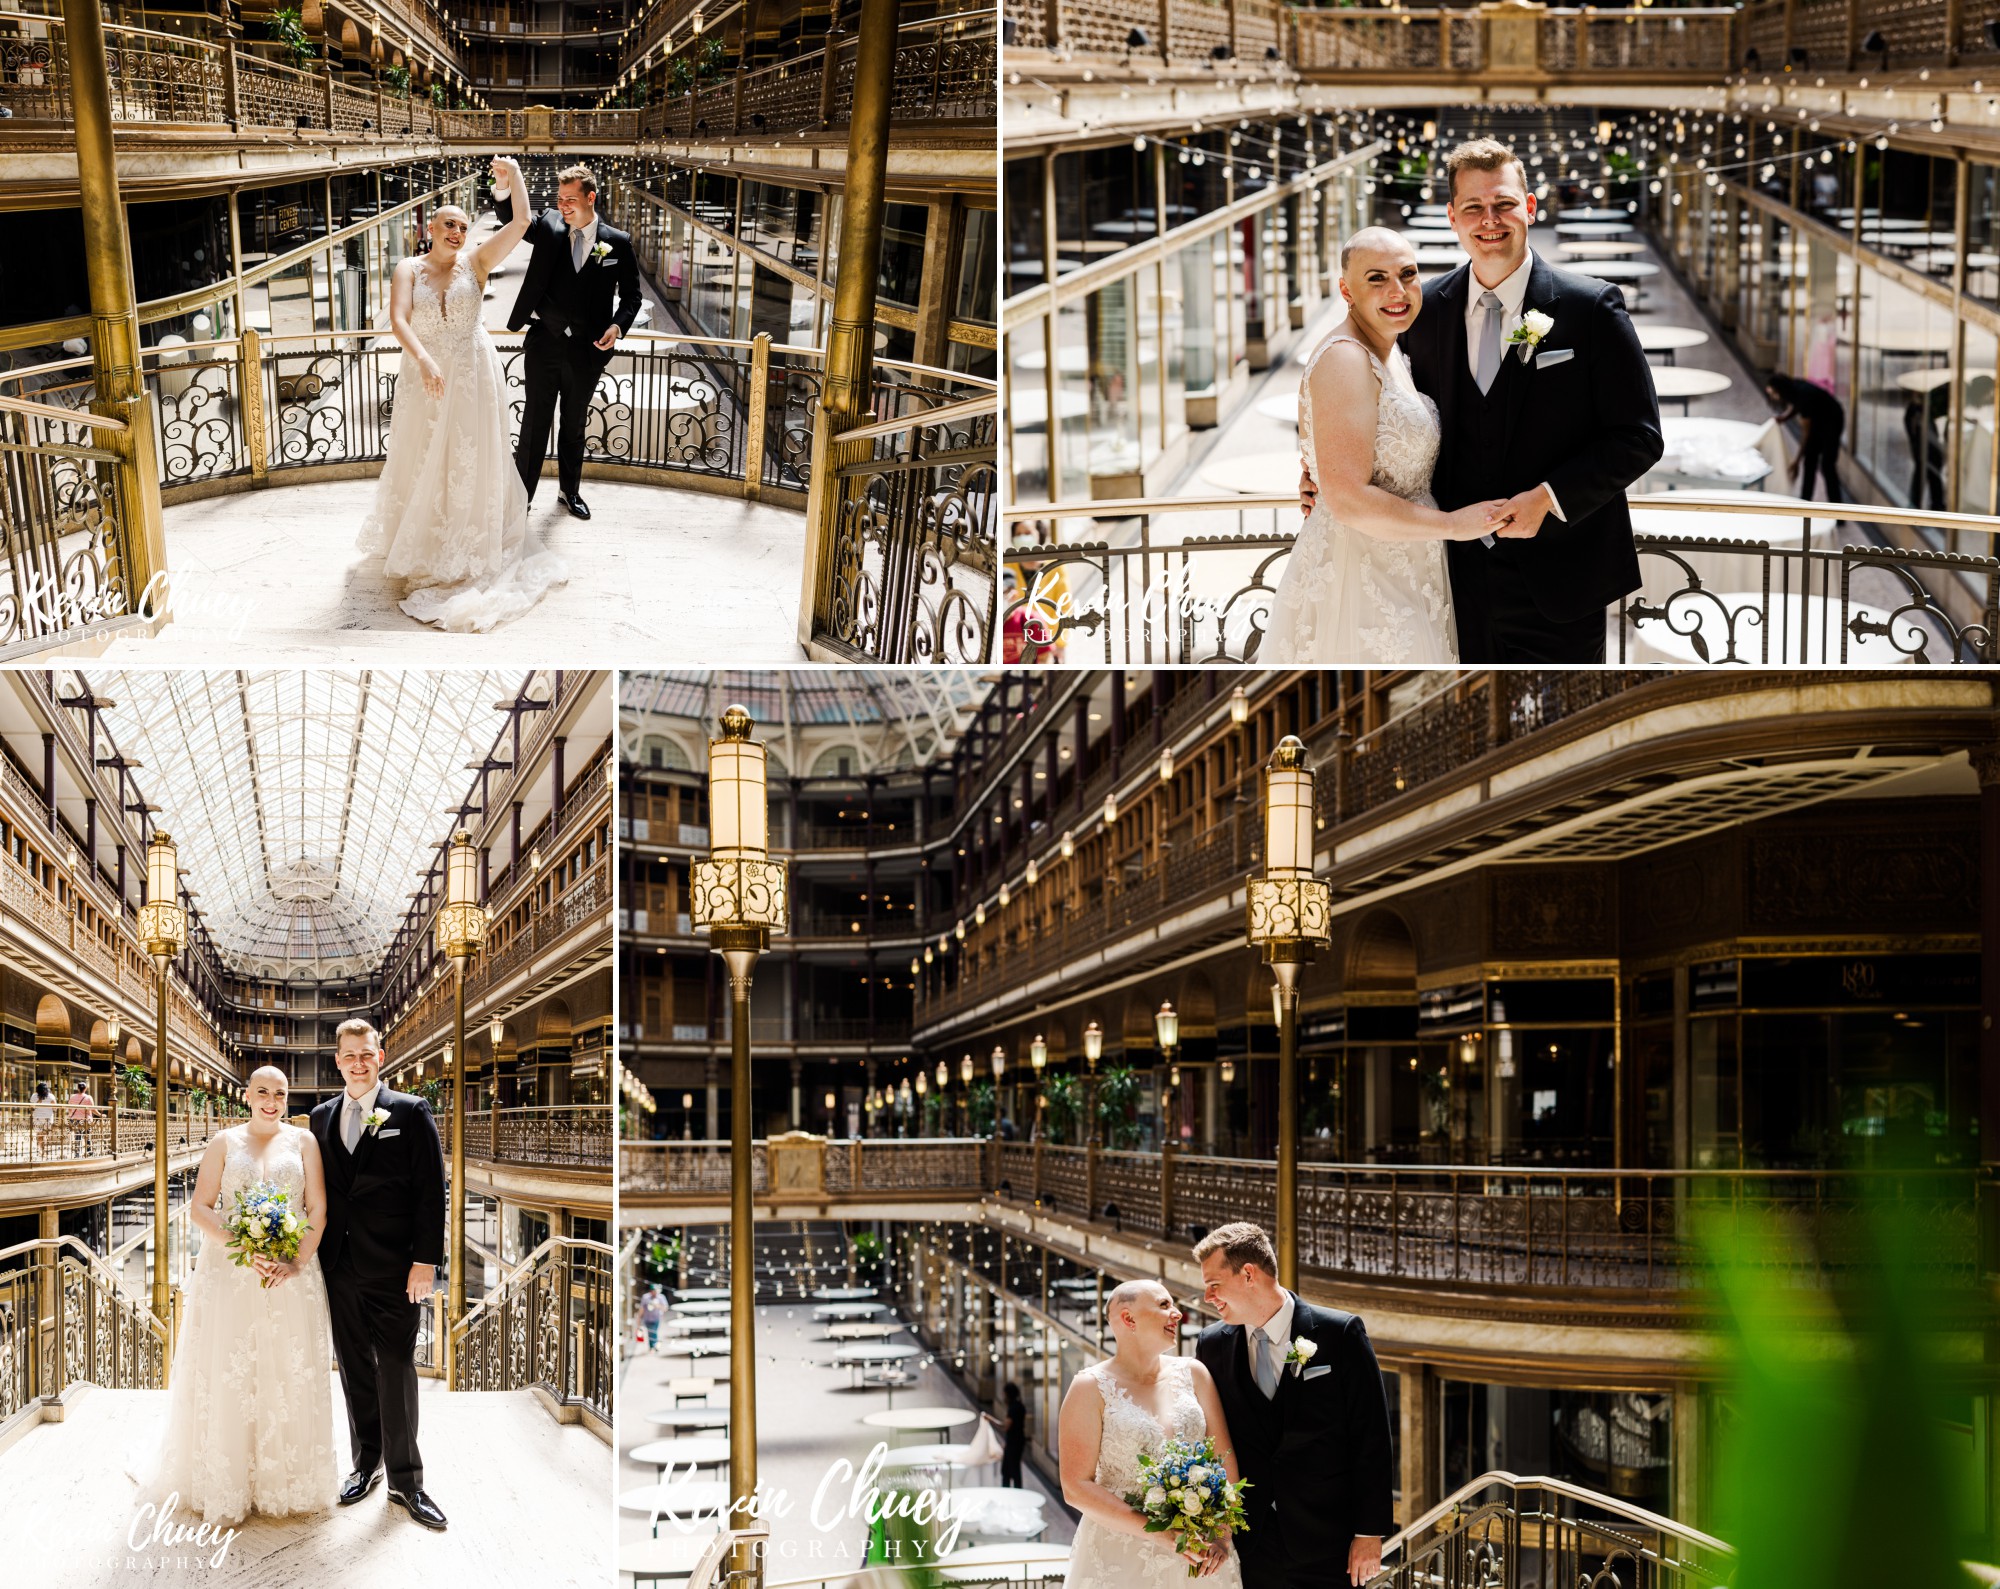 Bride and Groom at Cleveland's Historic Arcade